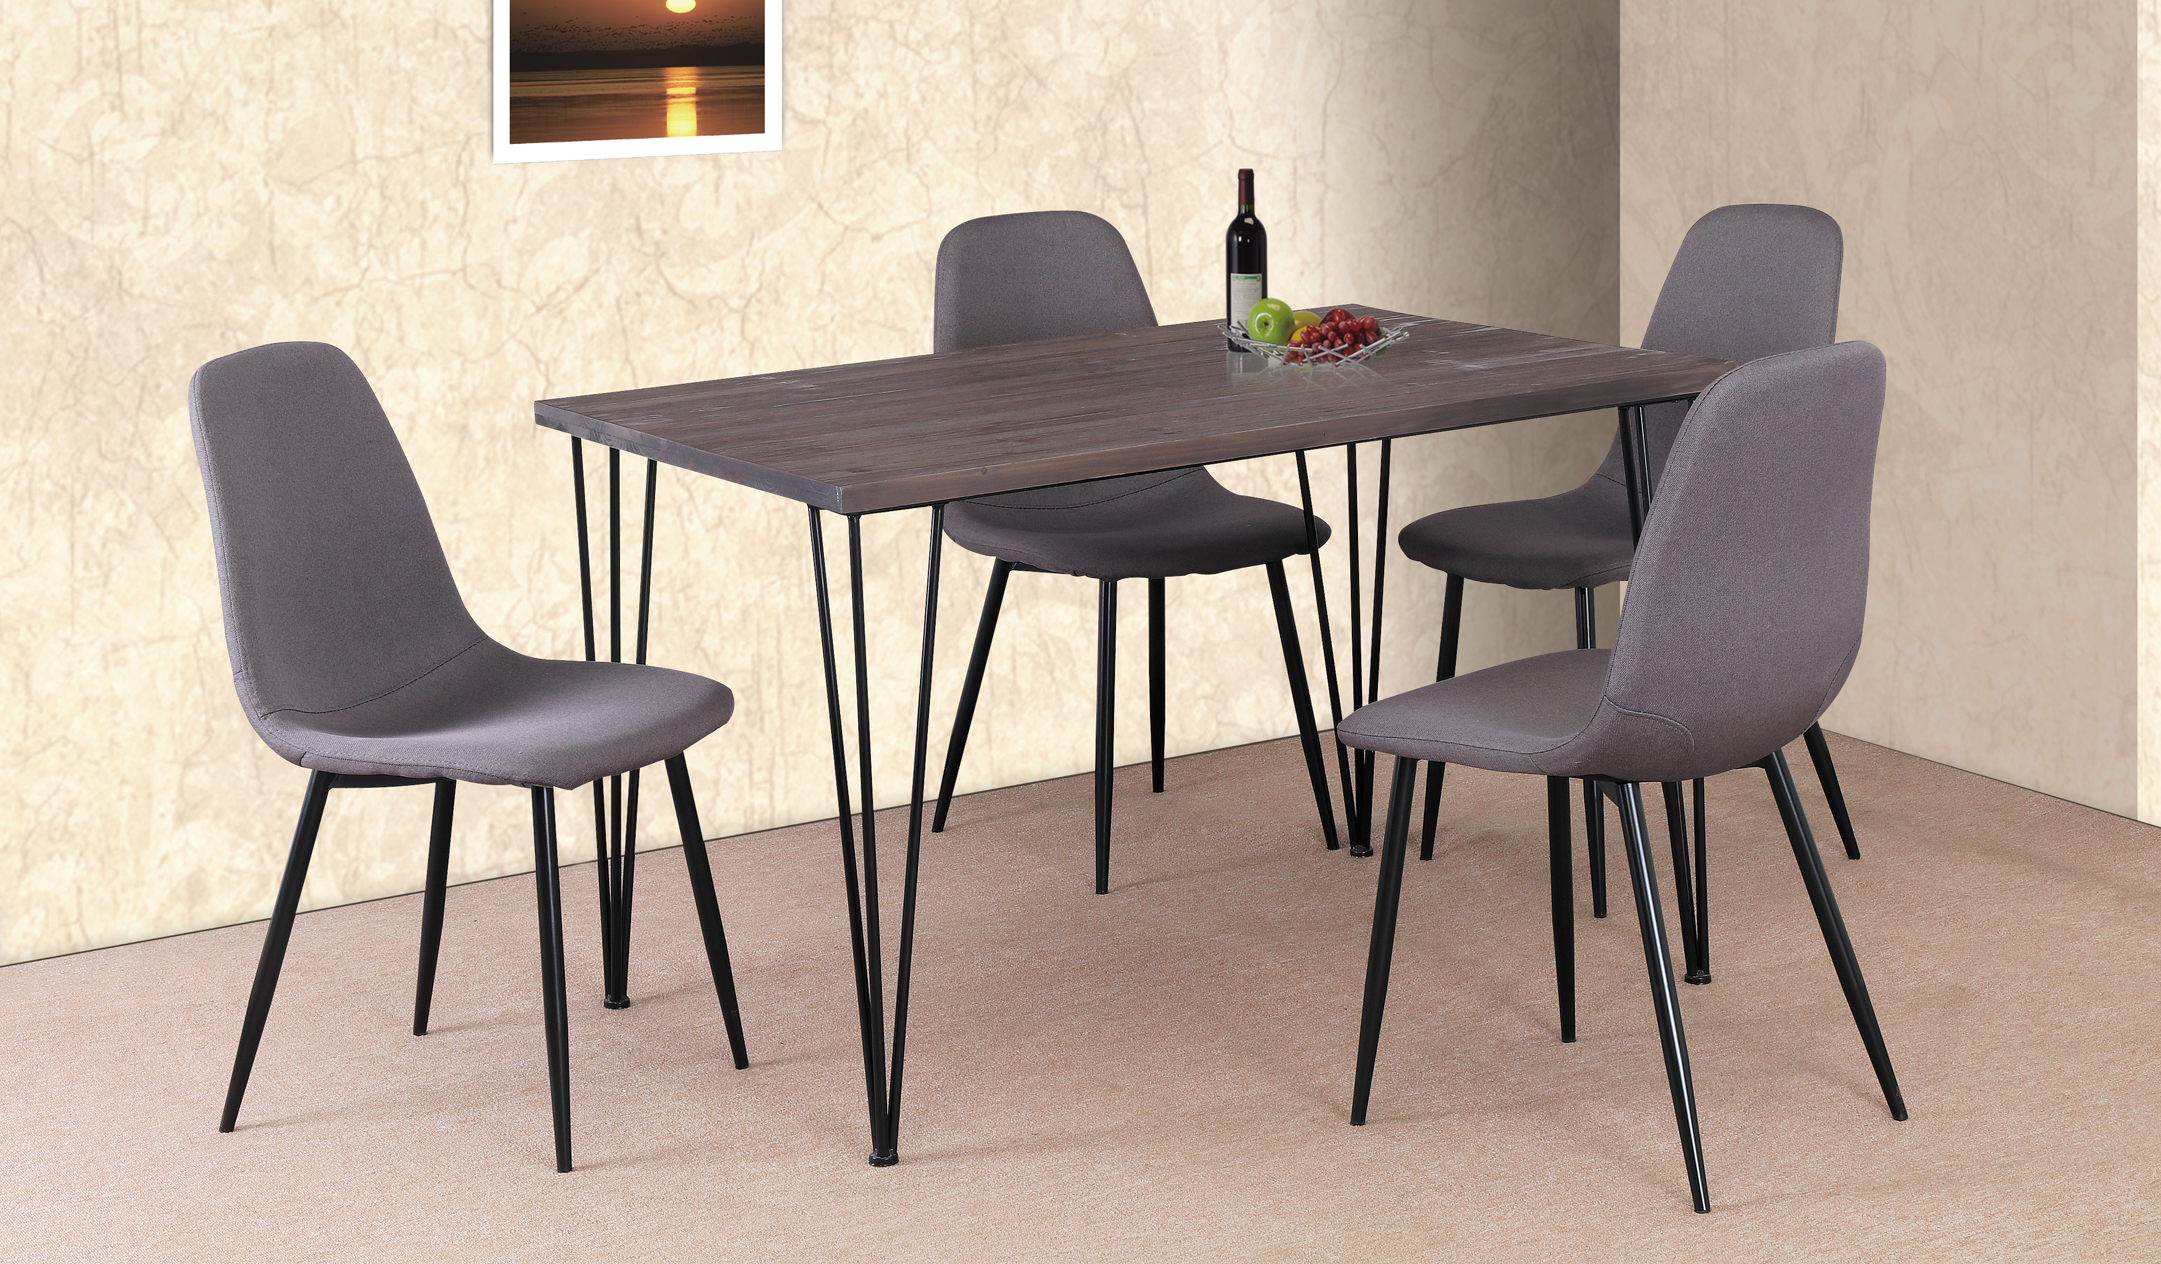 GS-5148 5PC DINING SET Featured Image